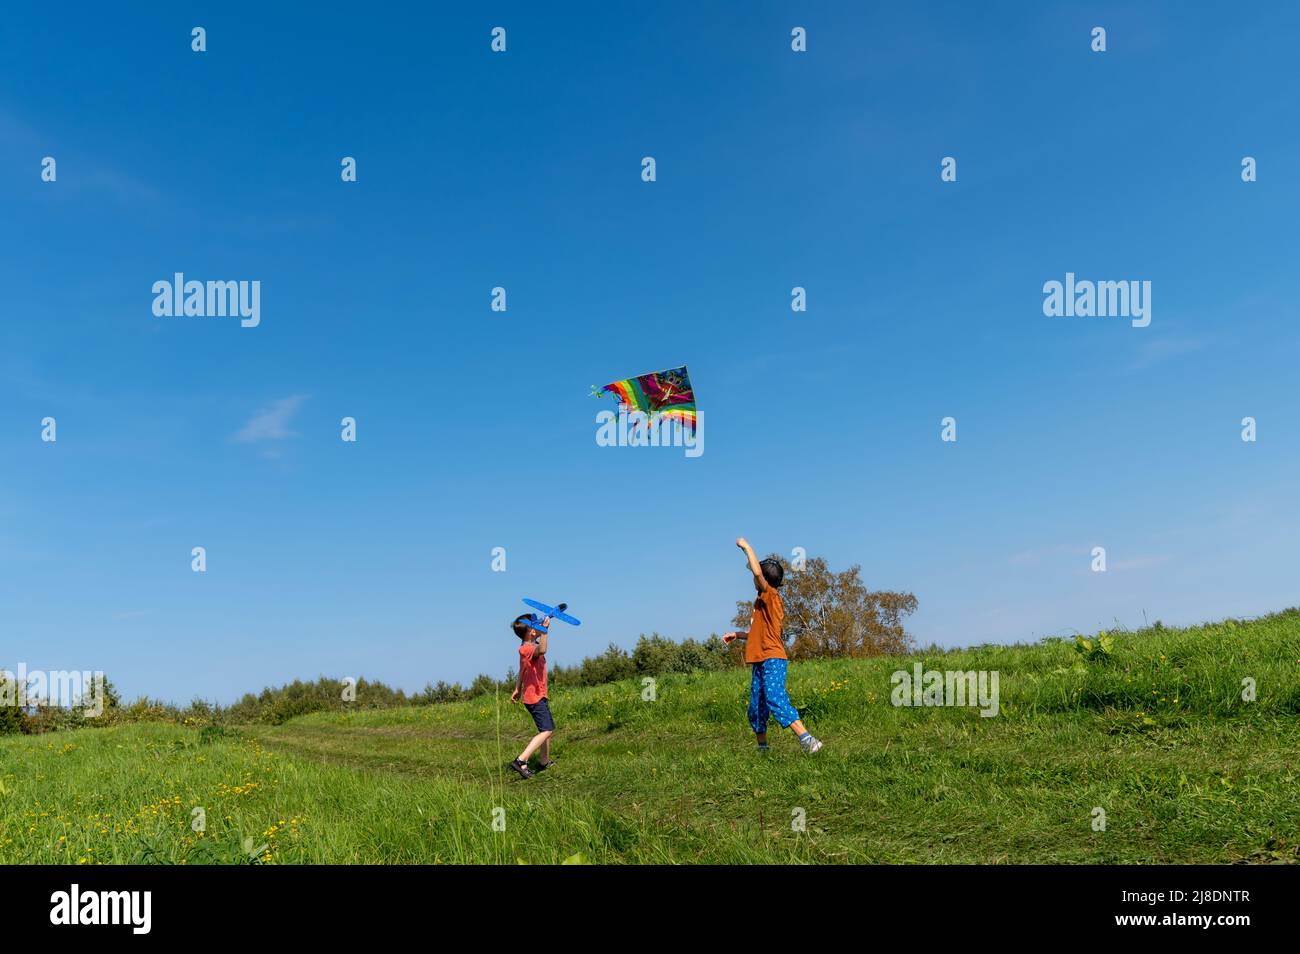 Two little boys playing together with kite and airplane toy in countryside. Stock Photo